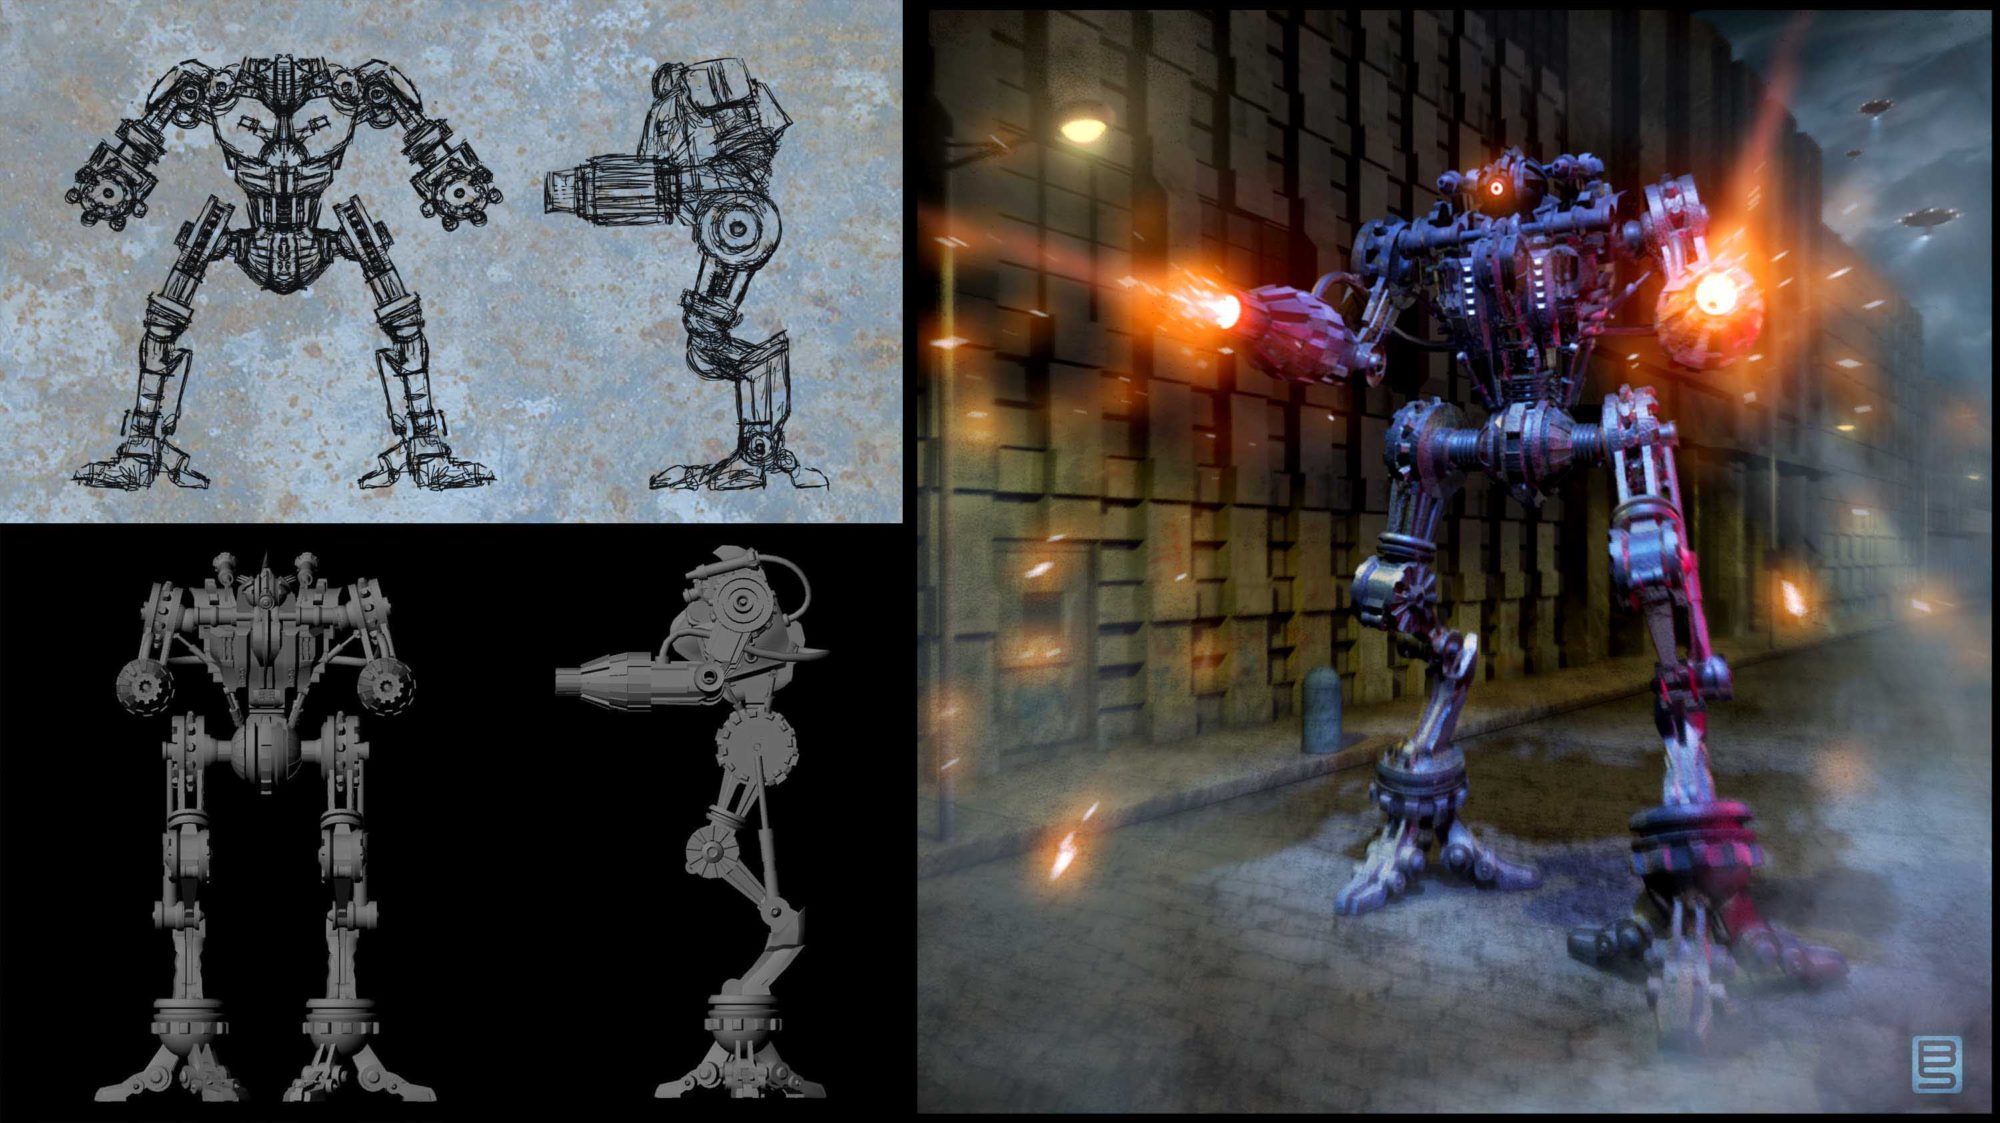 Left Images: Robot ortho sketches and 3D model. Right Image: Final composited design.